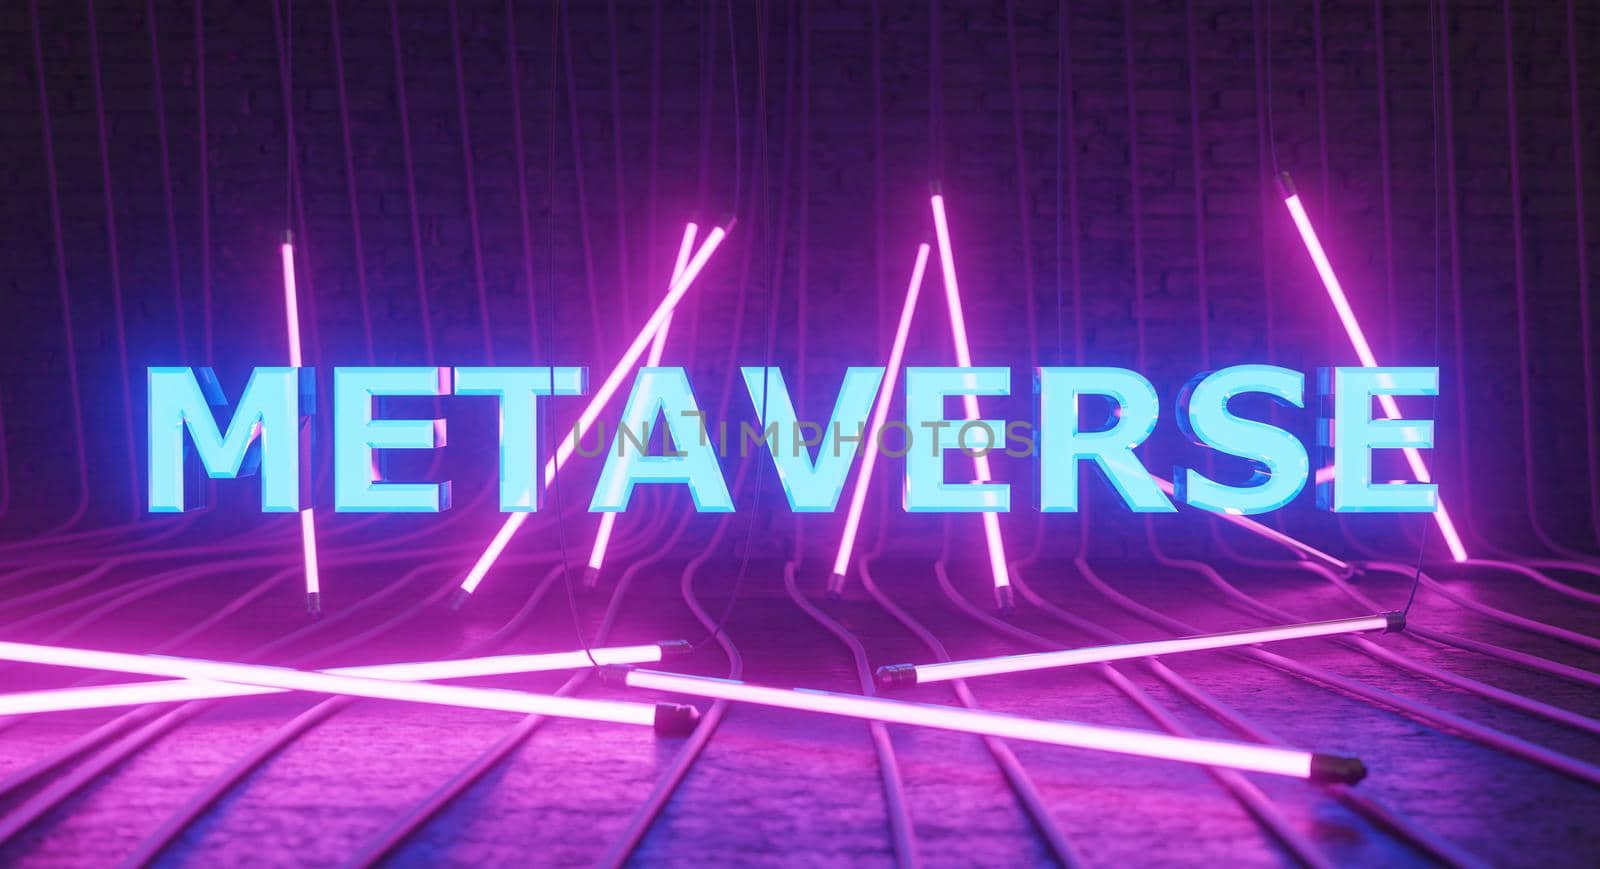 METAVERSE light sign with neon bars around by asolano